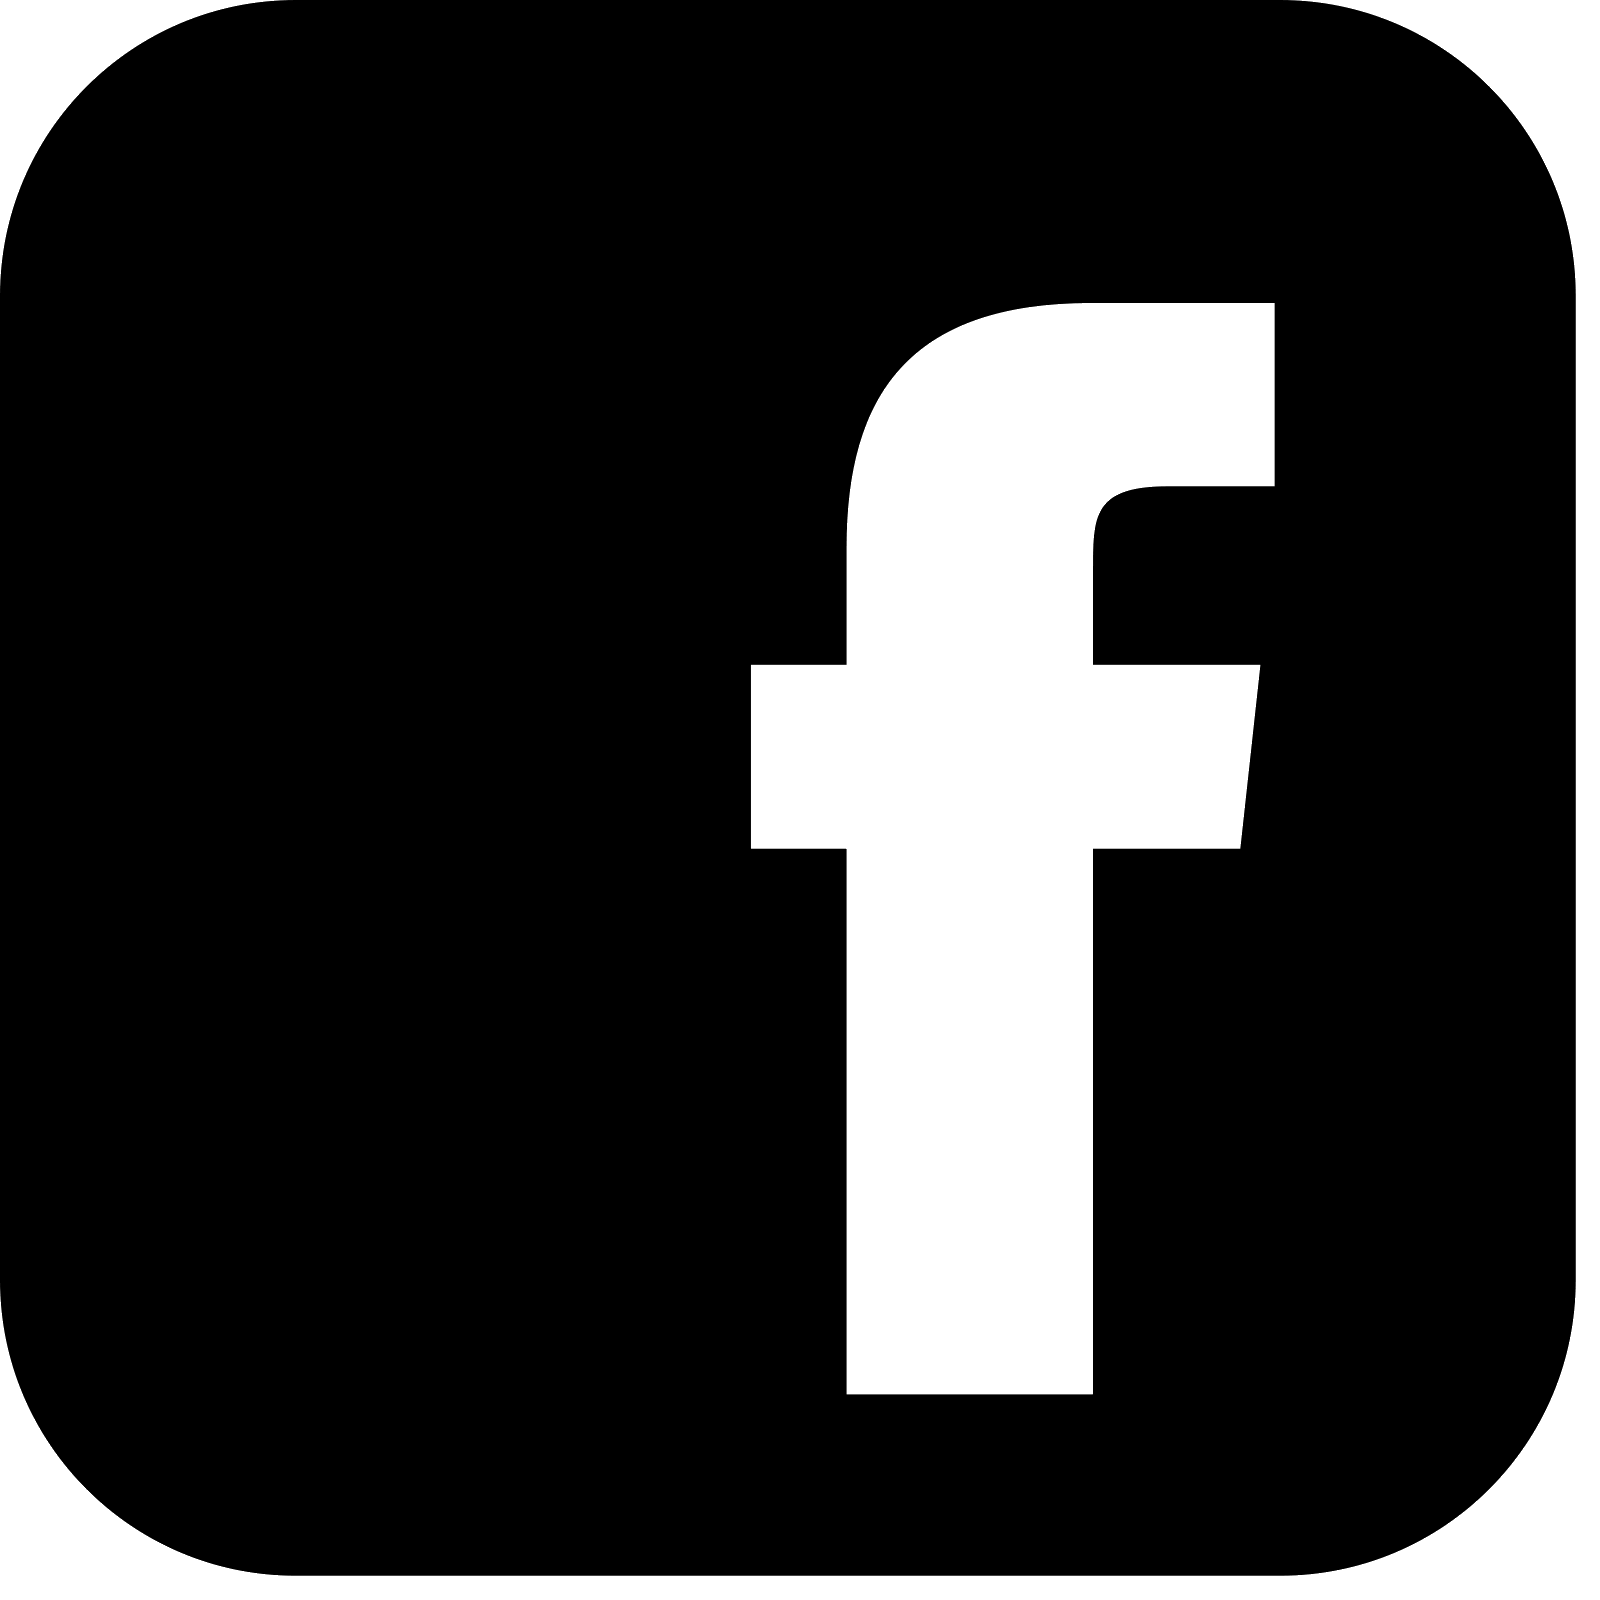 Black Facebook Logo - Clipart black and white of facebook logo - RR collections